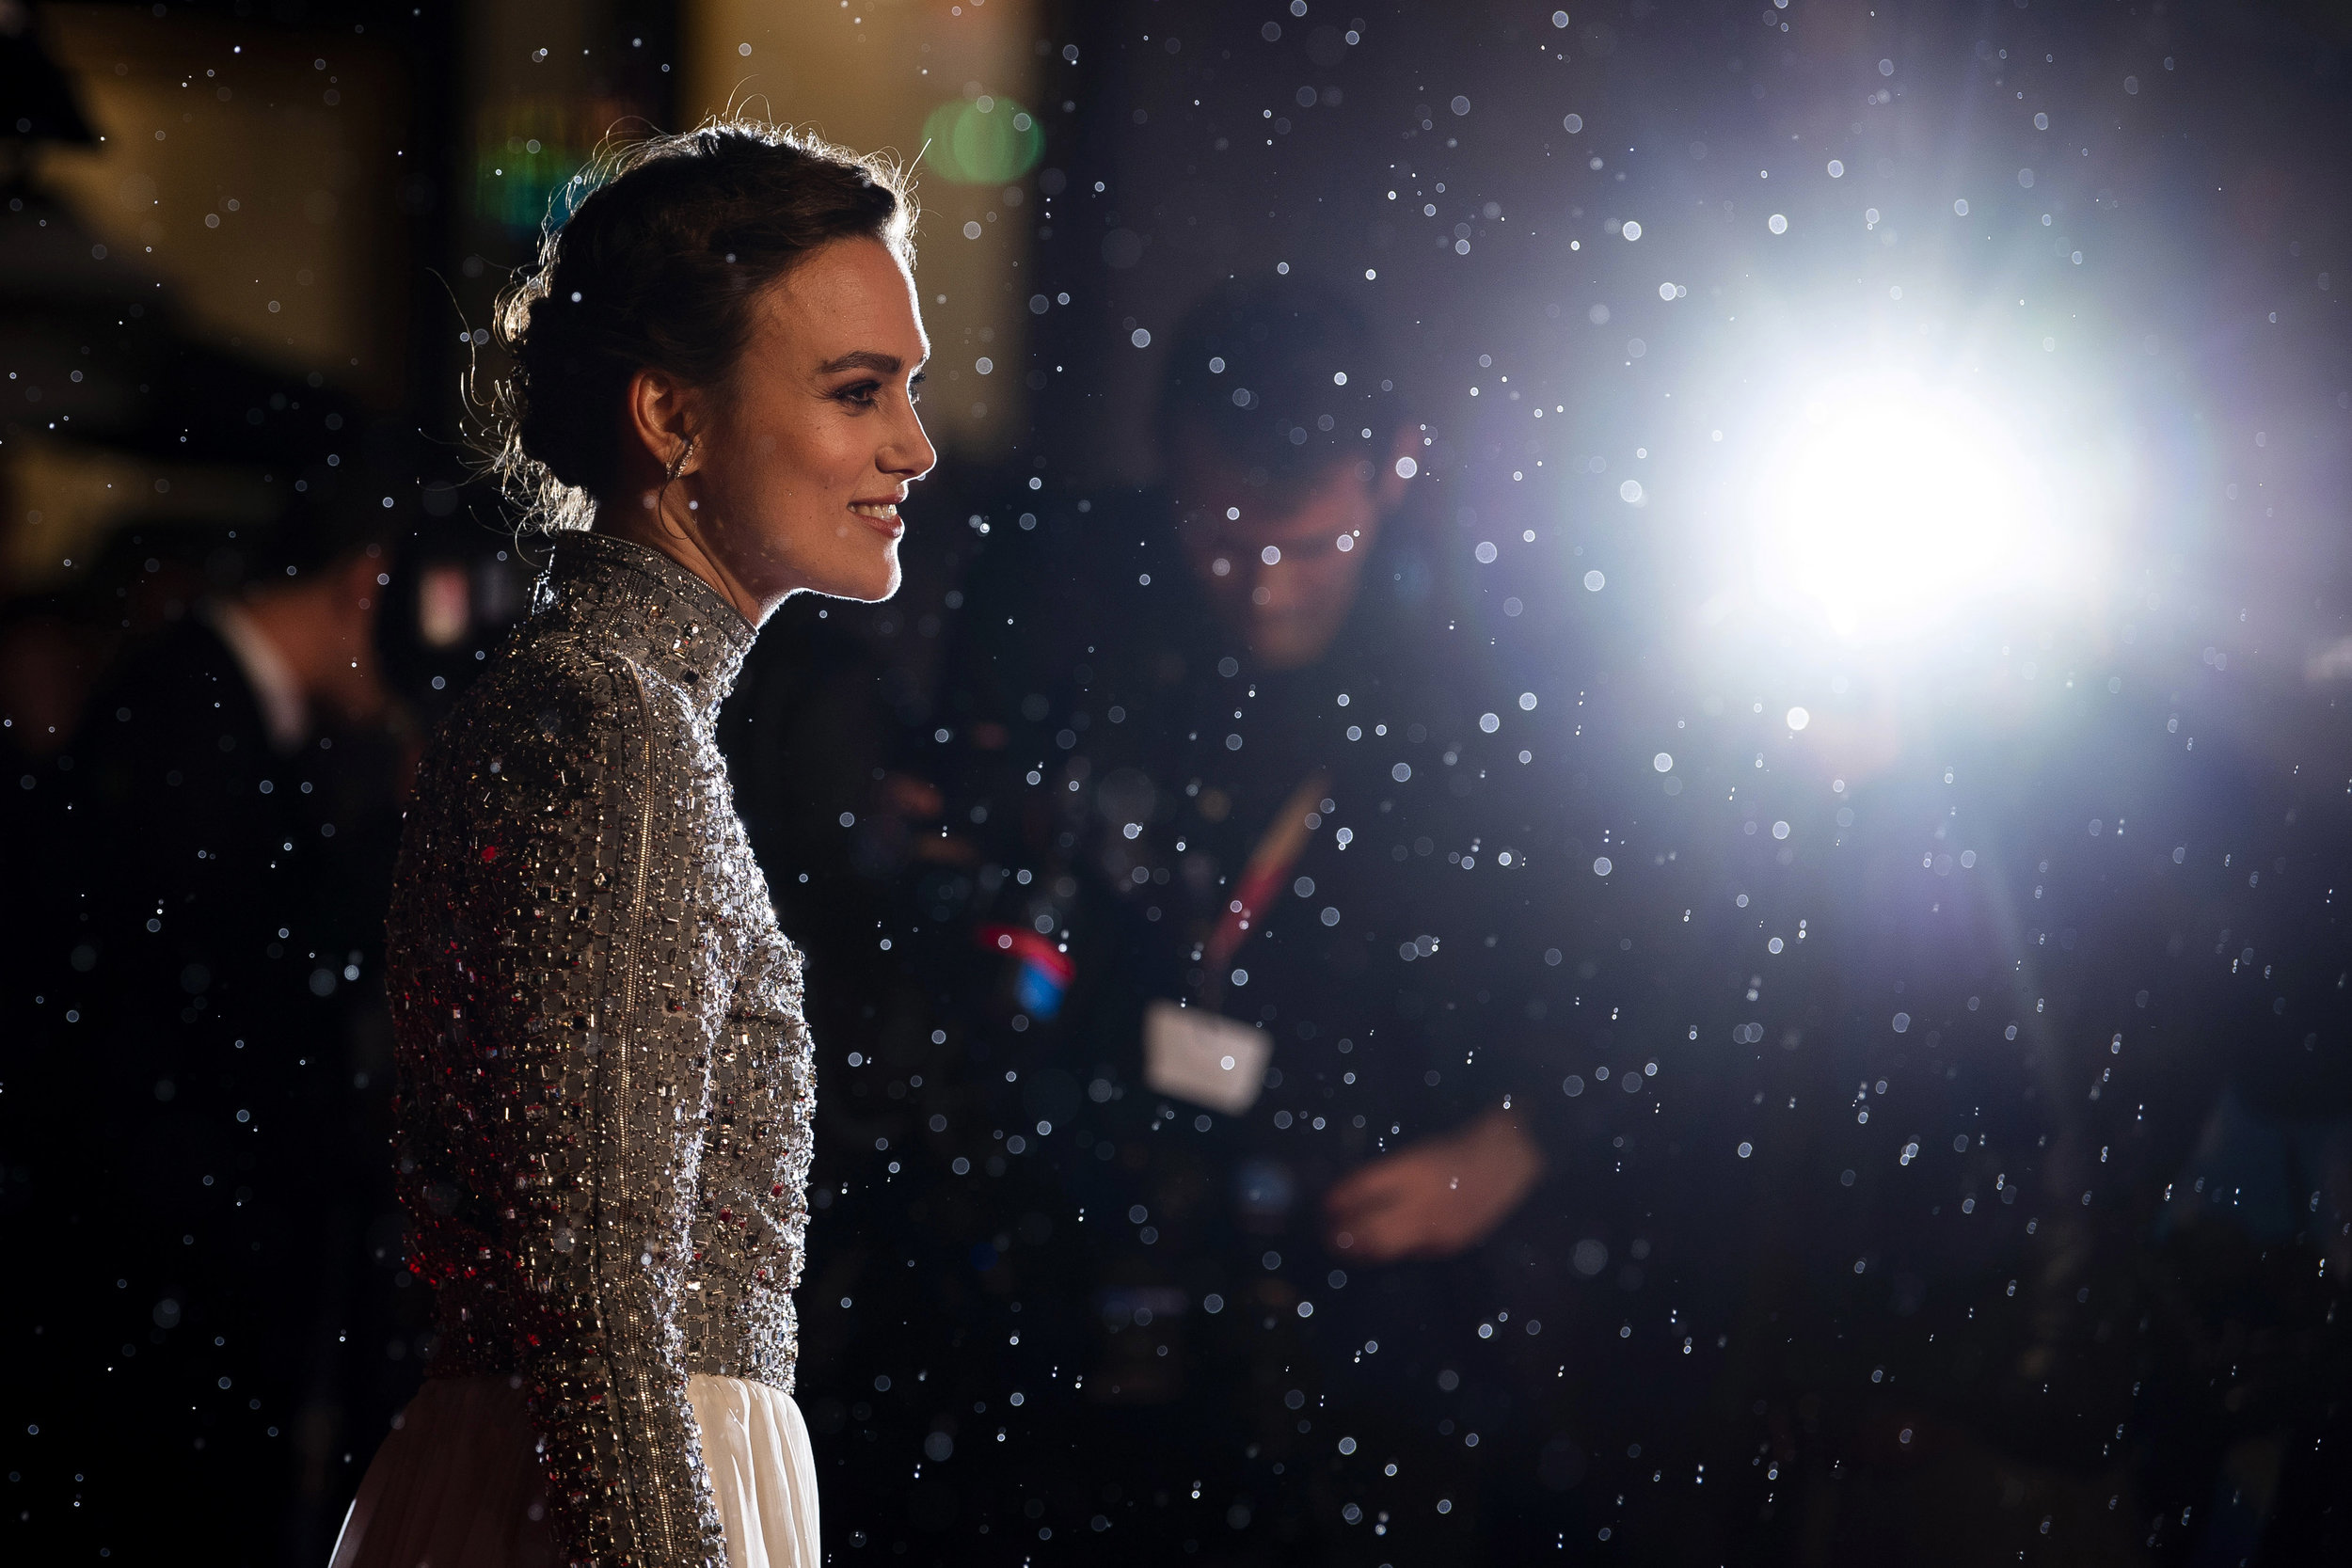  British actress/cast member Keira Knightley arrives at the Opening Night Gala premiere of 'Colette' at the BFI London Film Festival 2018, in London.
Photo by Will Oliver, 11 October 2018
 